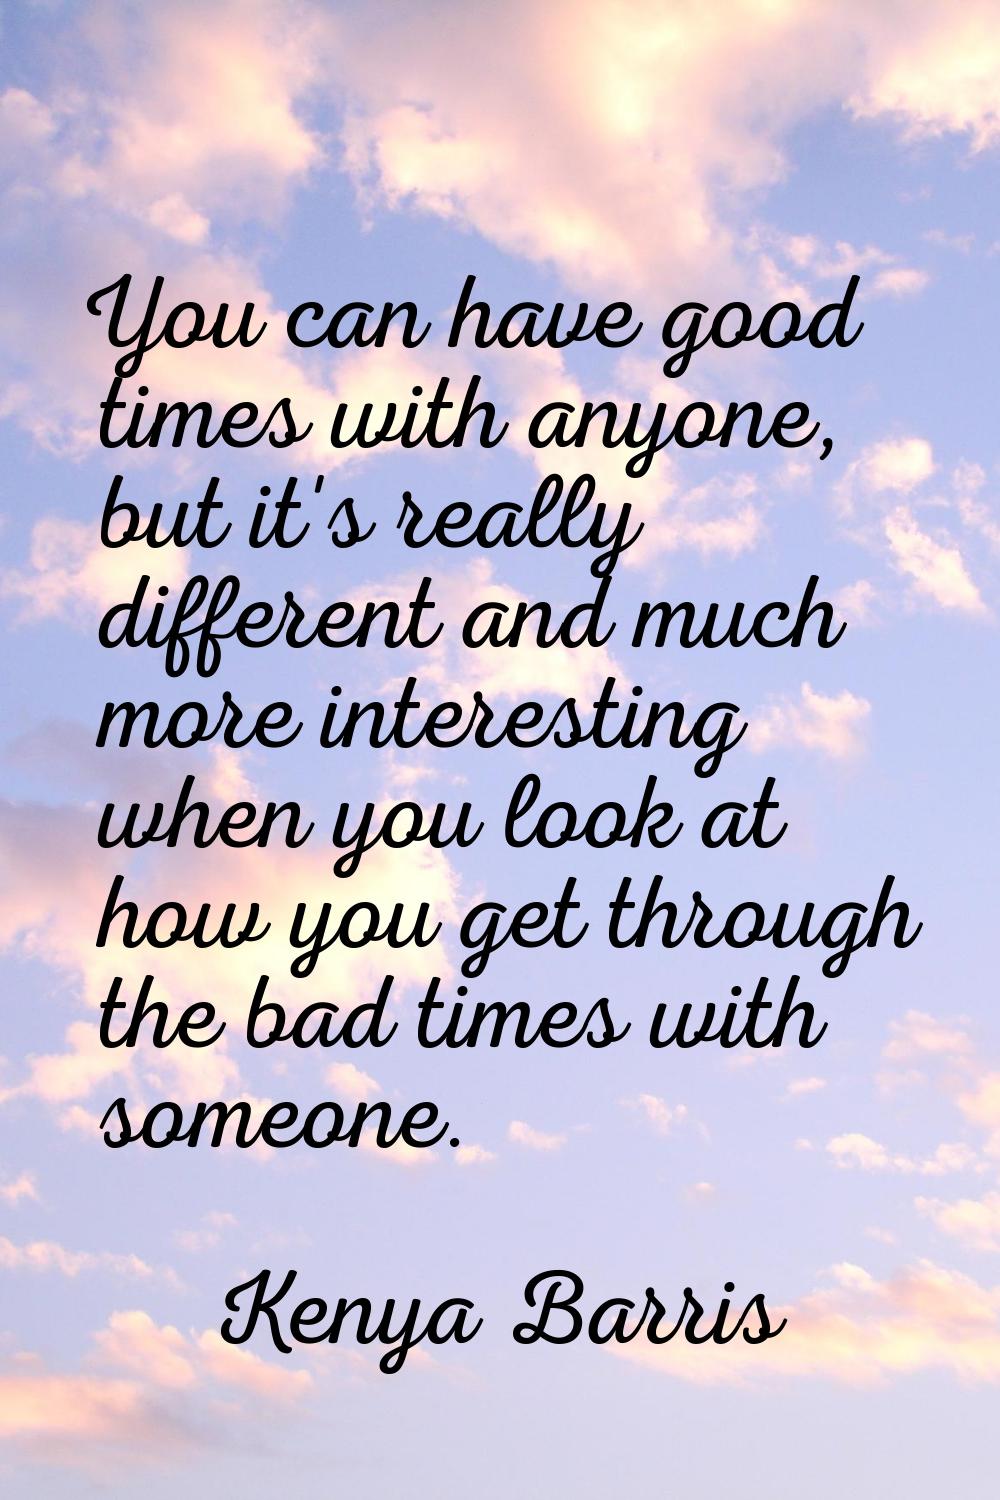 You can have good times with anyone, but it's really different and much more interesting when you l